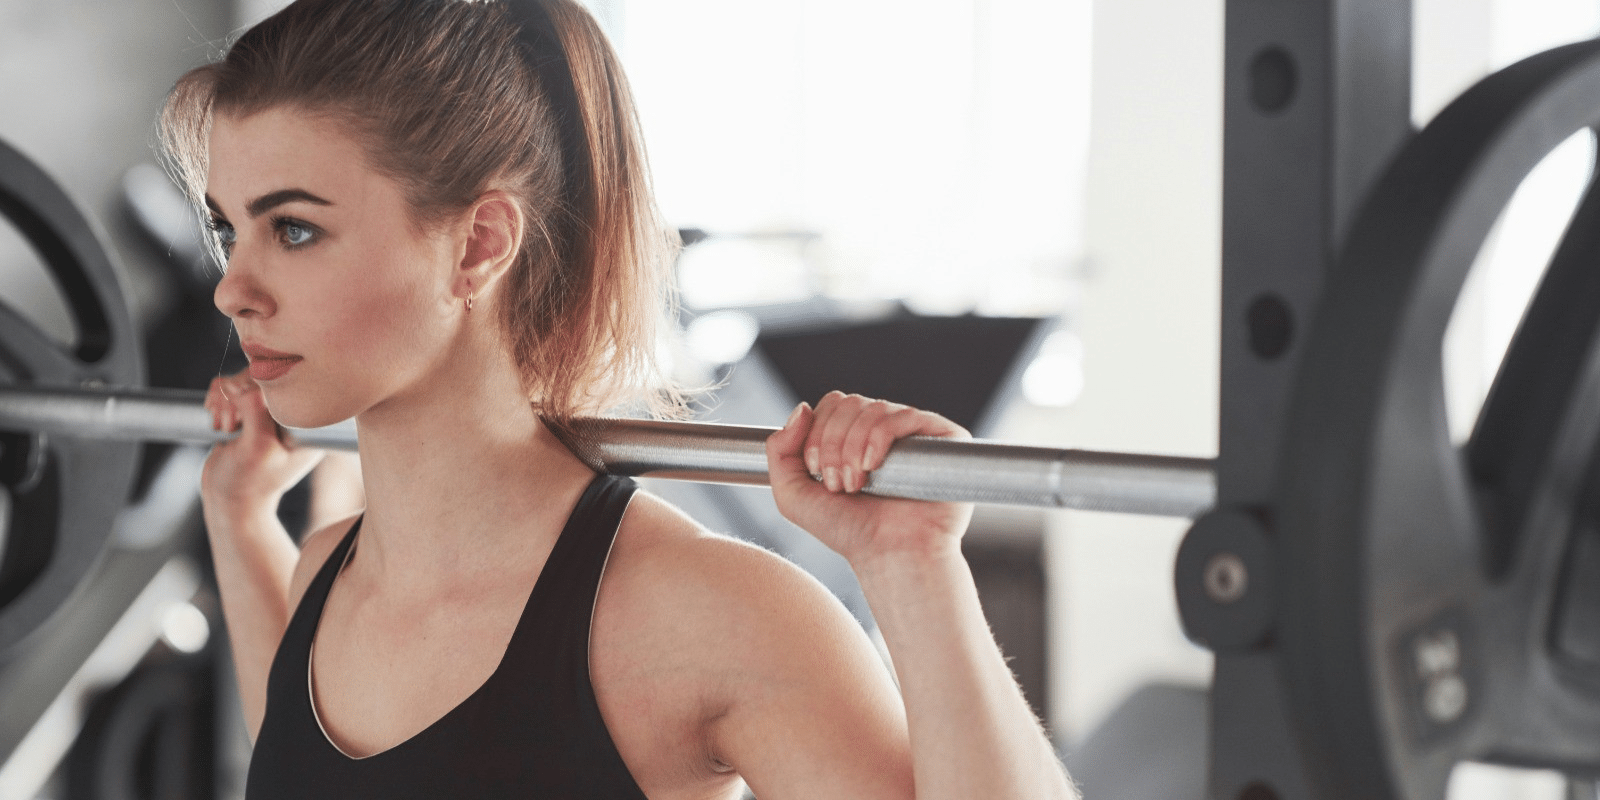 Exploring the Idea of Opening an All-Women's Gym in Chicago